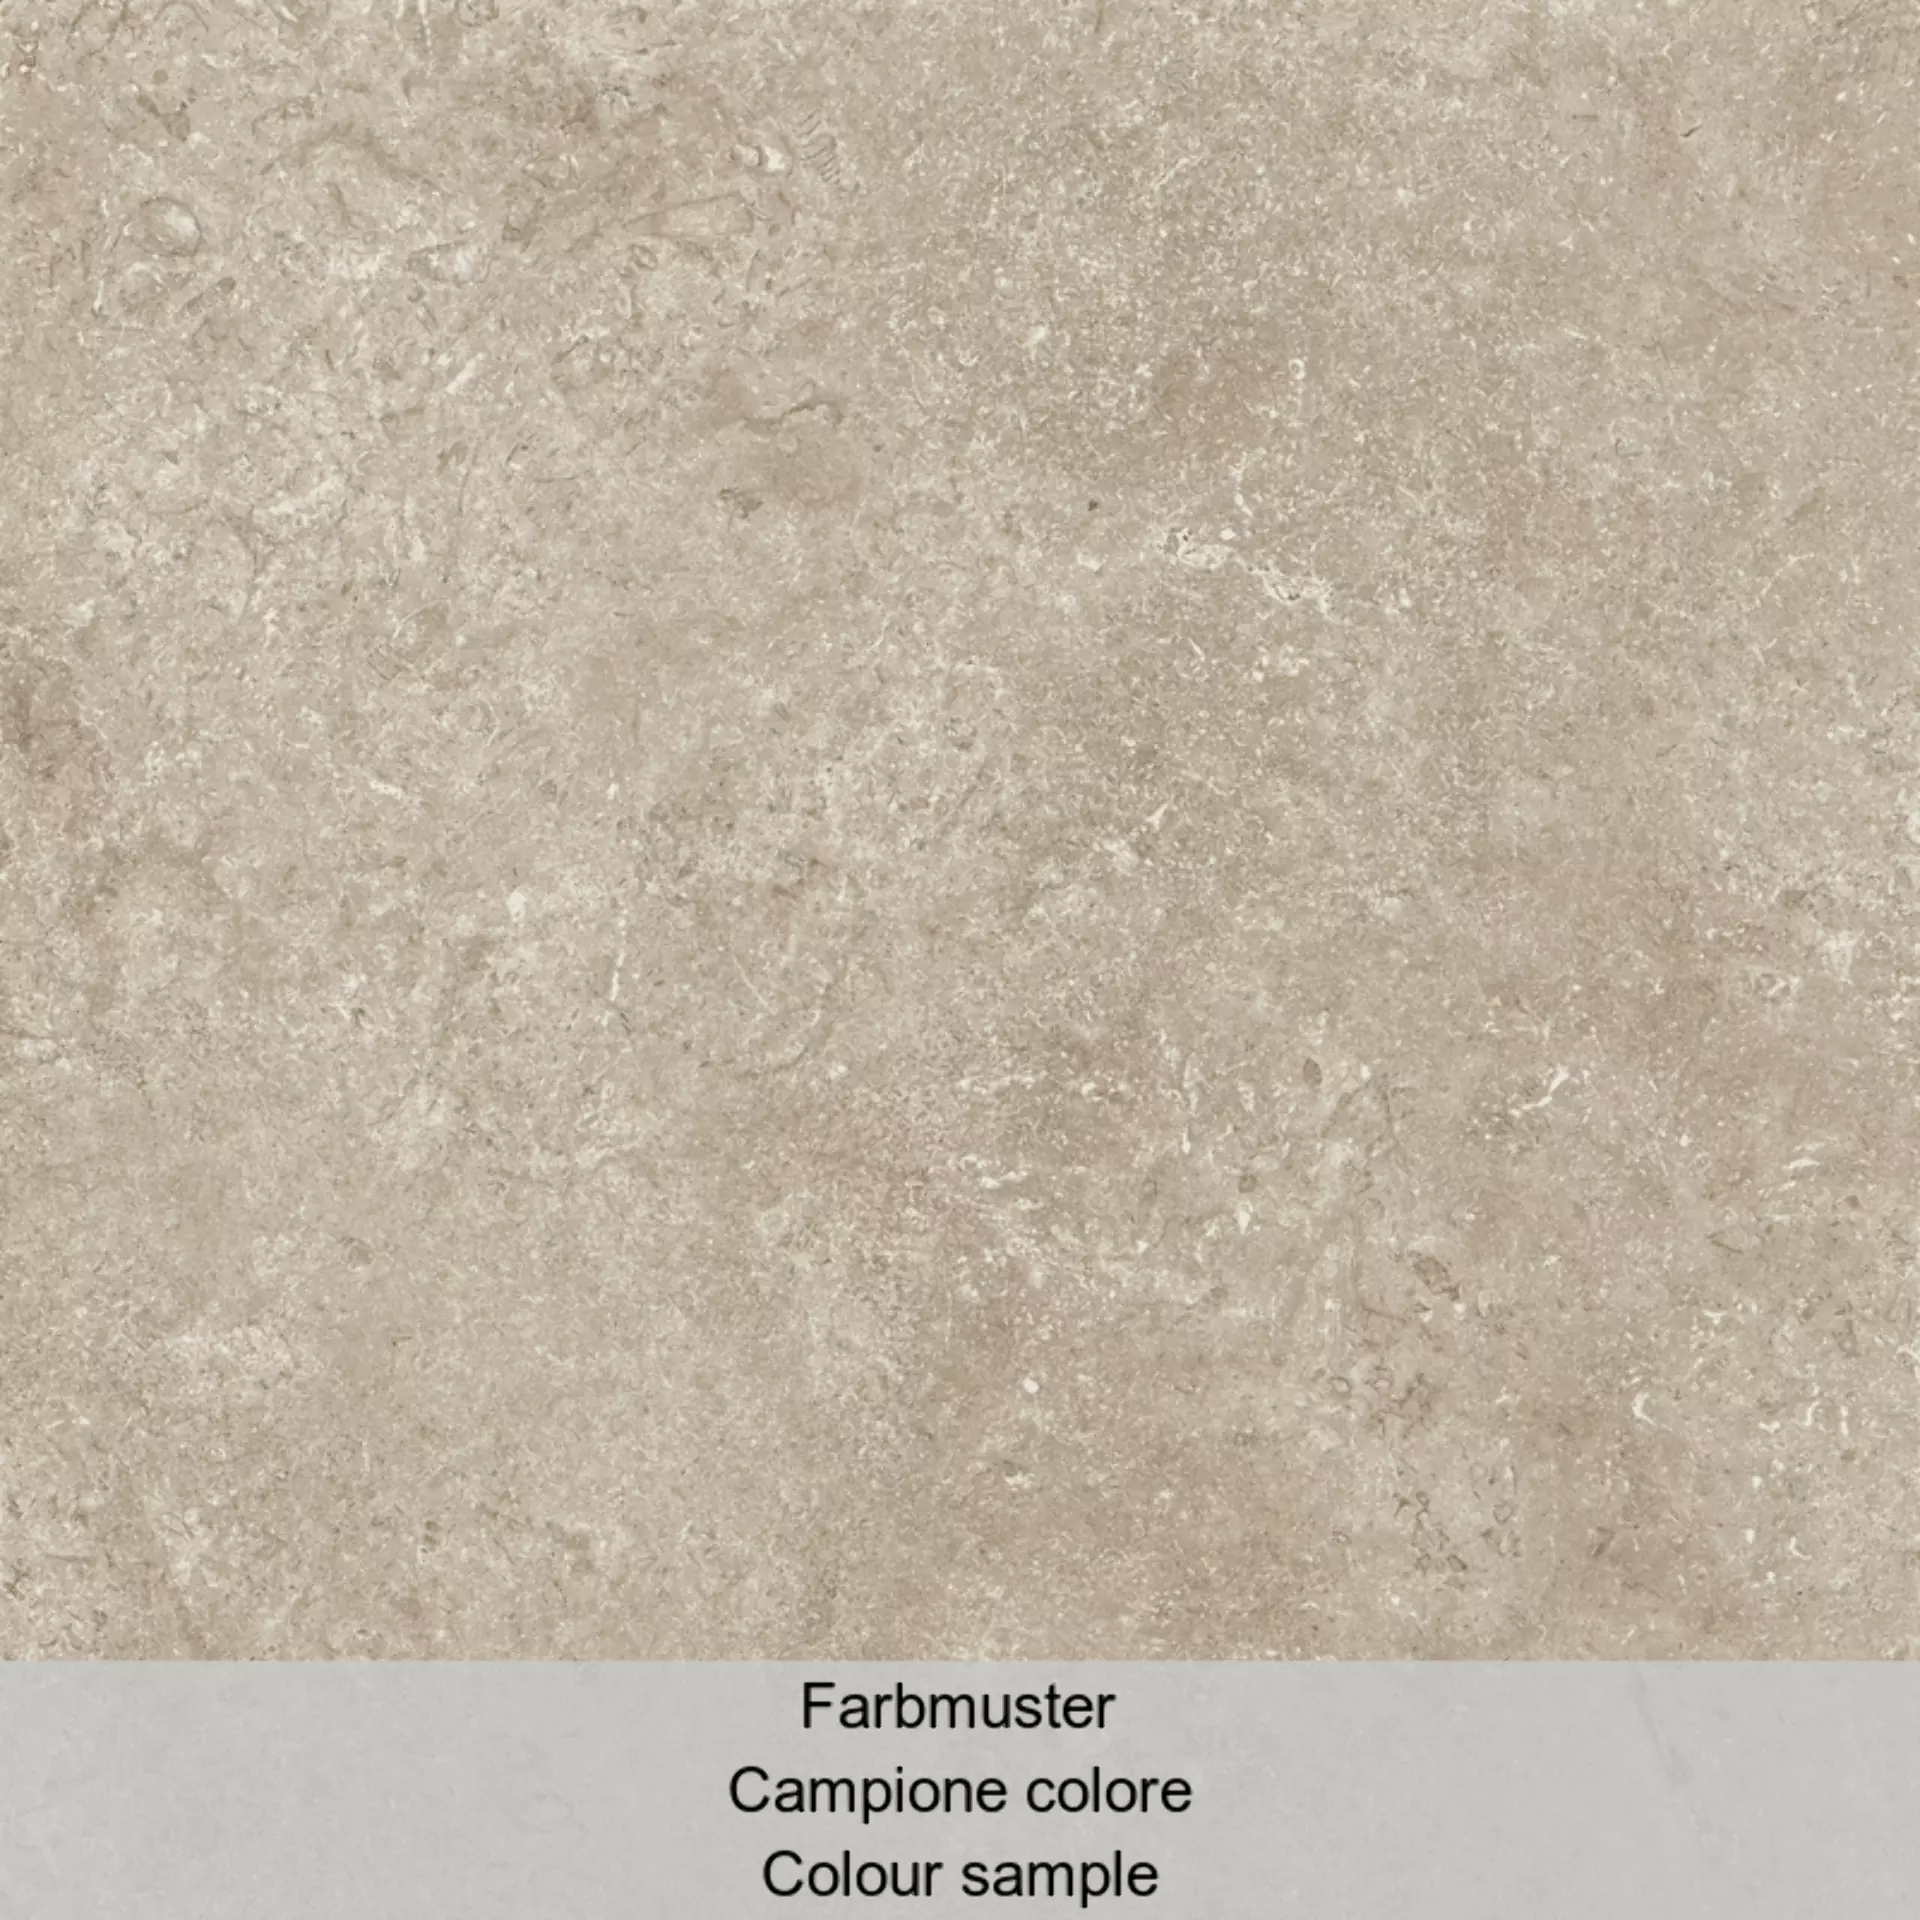 Cottodeste Secret Stone Shadow Grey Hammered EGGSS93 90x90cm rectified 20mm